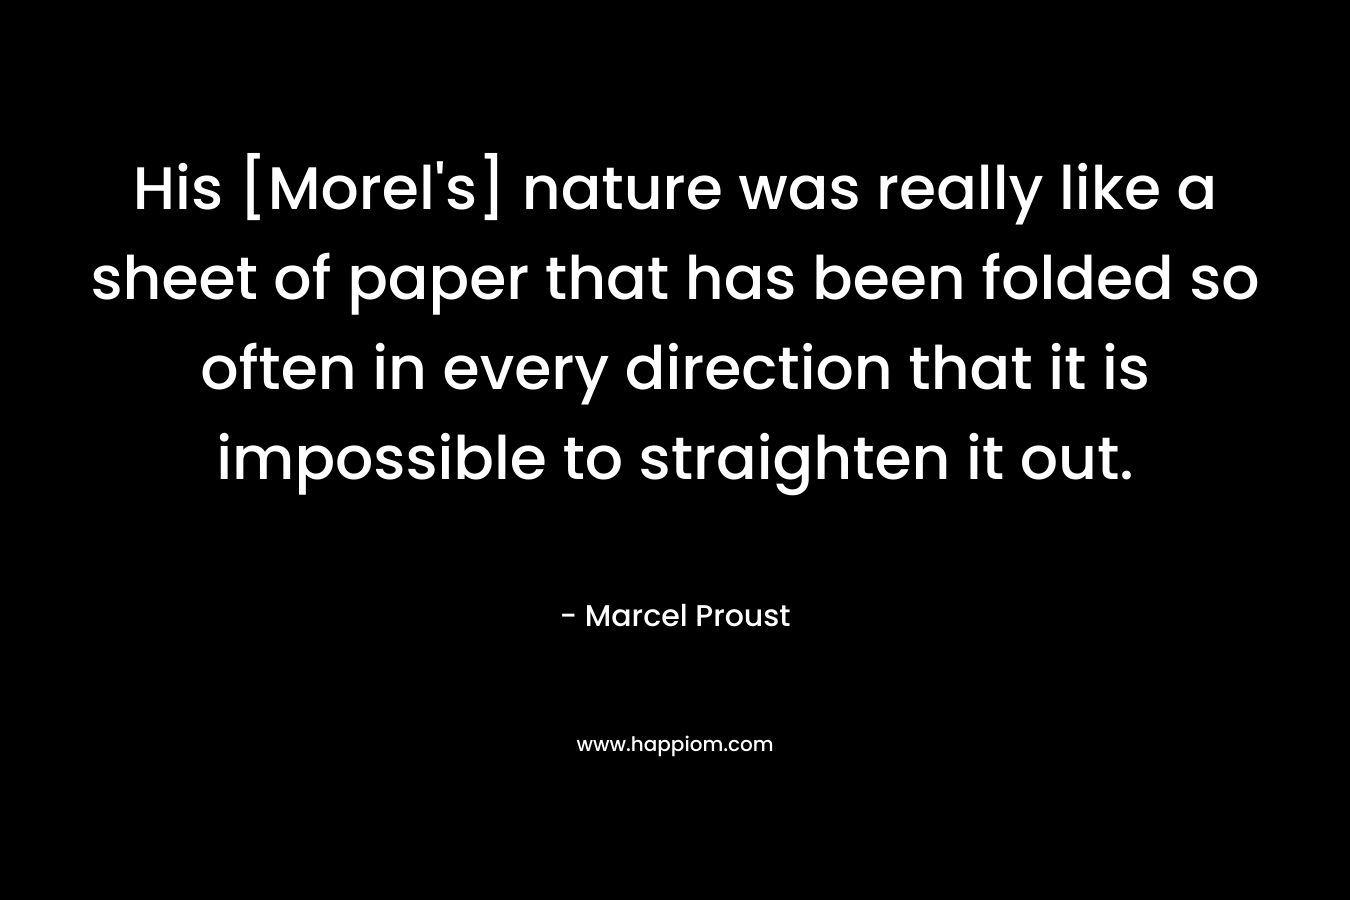 His [Morel’s] nature was really like a sheet of paper that has been folded so often in every direction that it is impossible to straighten it out. – Marcel Proust